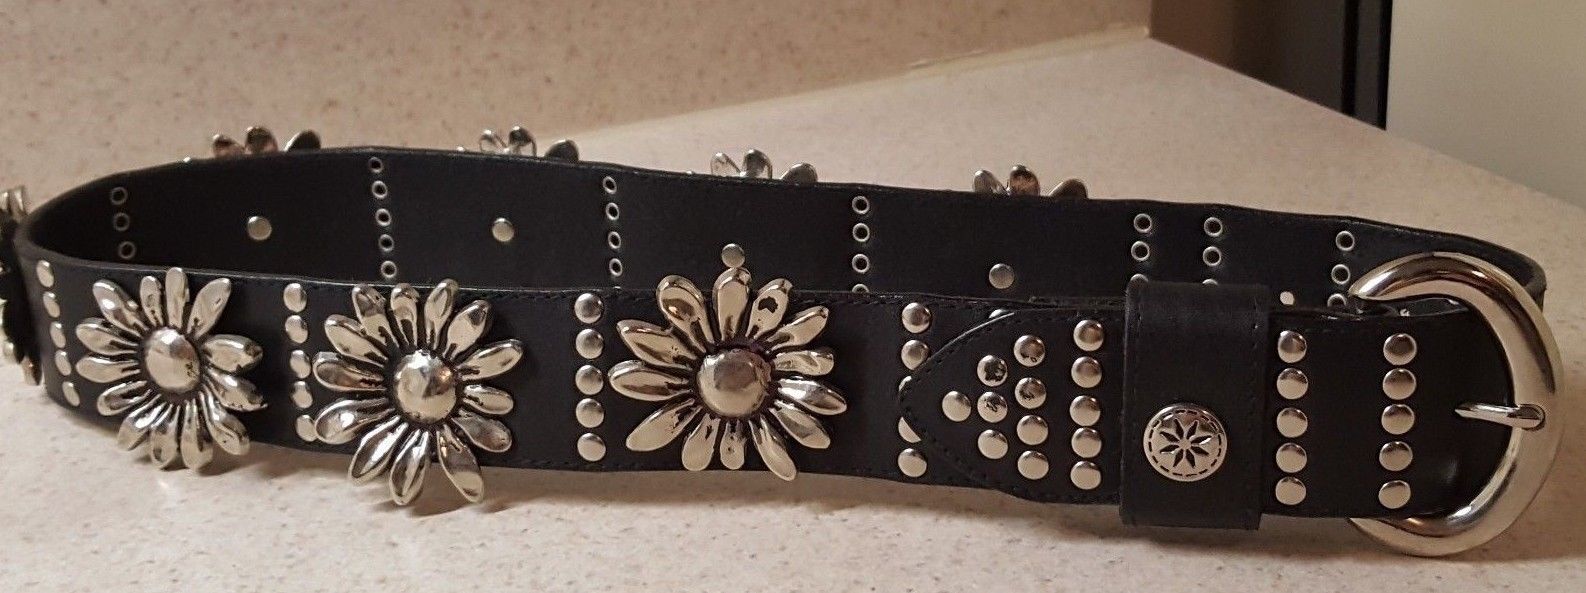 EXPRESS Girls Youth Leather Belt, Metal Flowers, Heavy Quality, 33